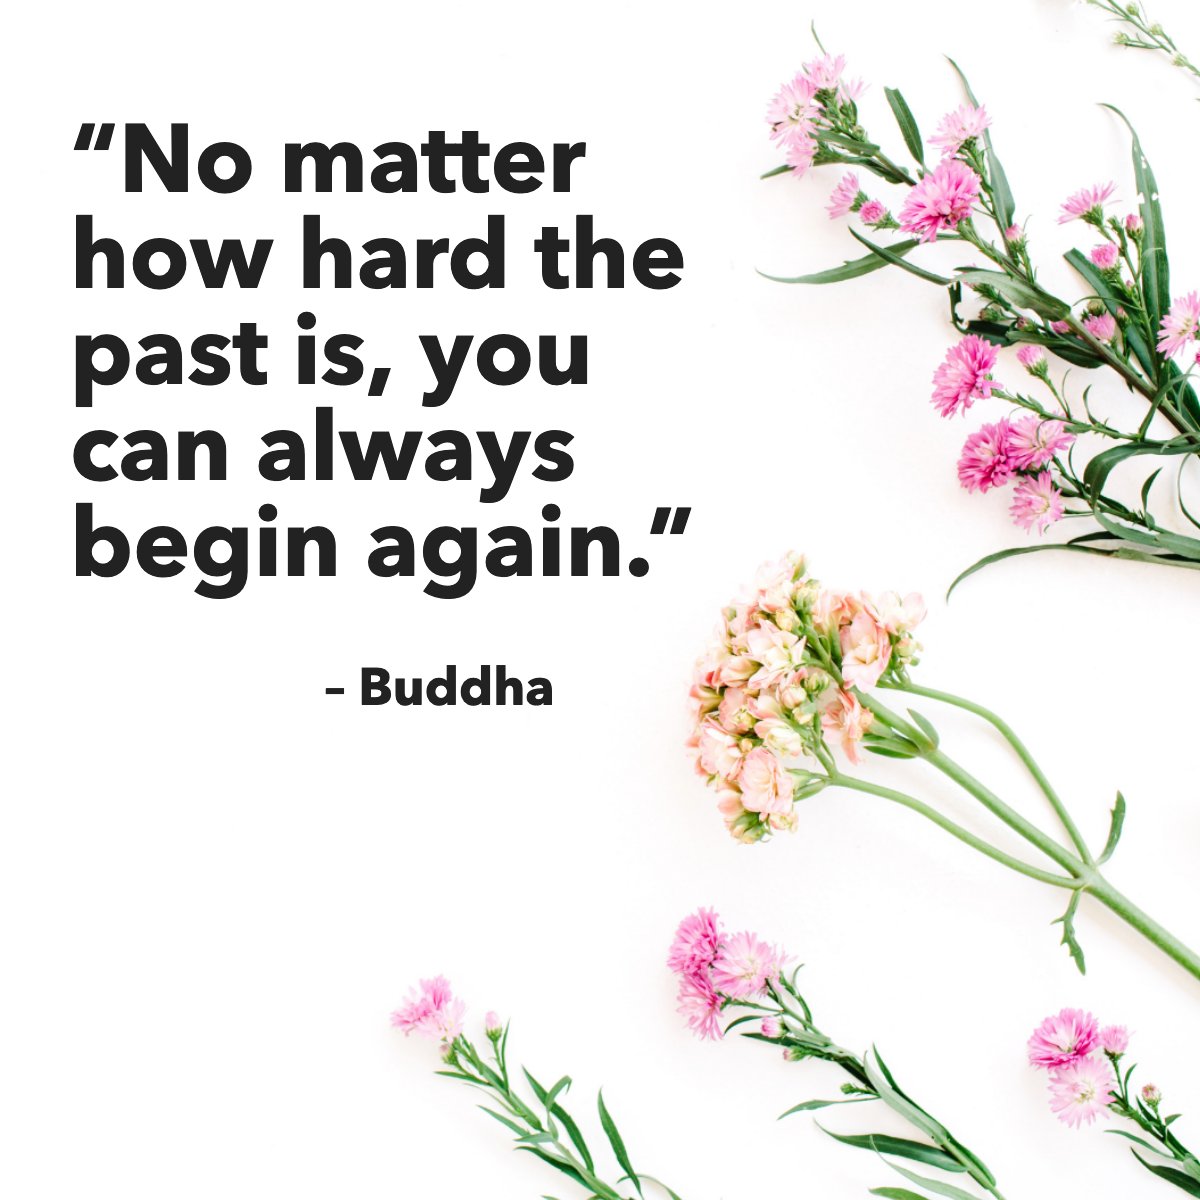 'No matter how hard the past is, you can always begin again.' 🙏 
– Buddha

What are you beginning this week? Drop us a line in the comments.

#flowers #florals #quote #newbeginnings #buddha
 #thefuentesteam